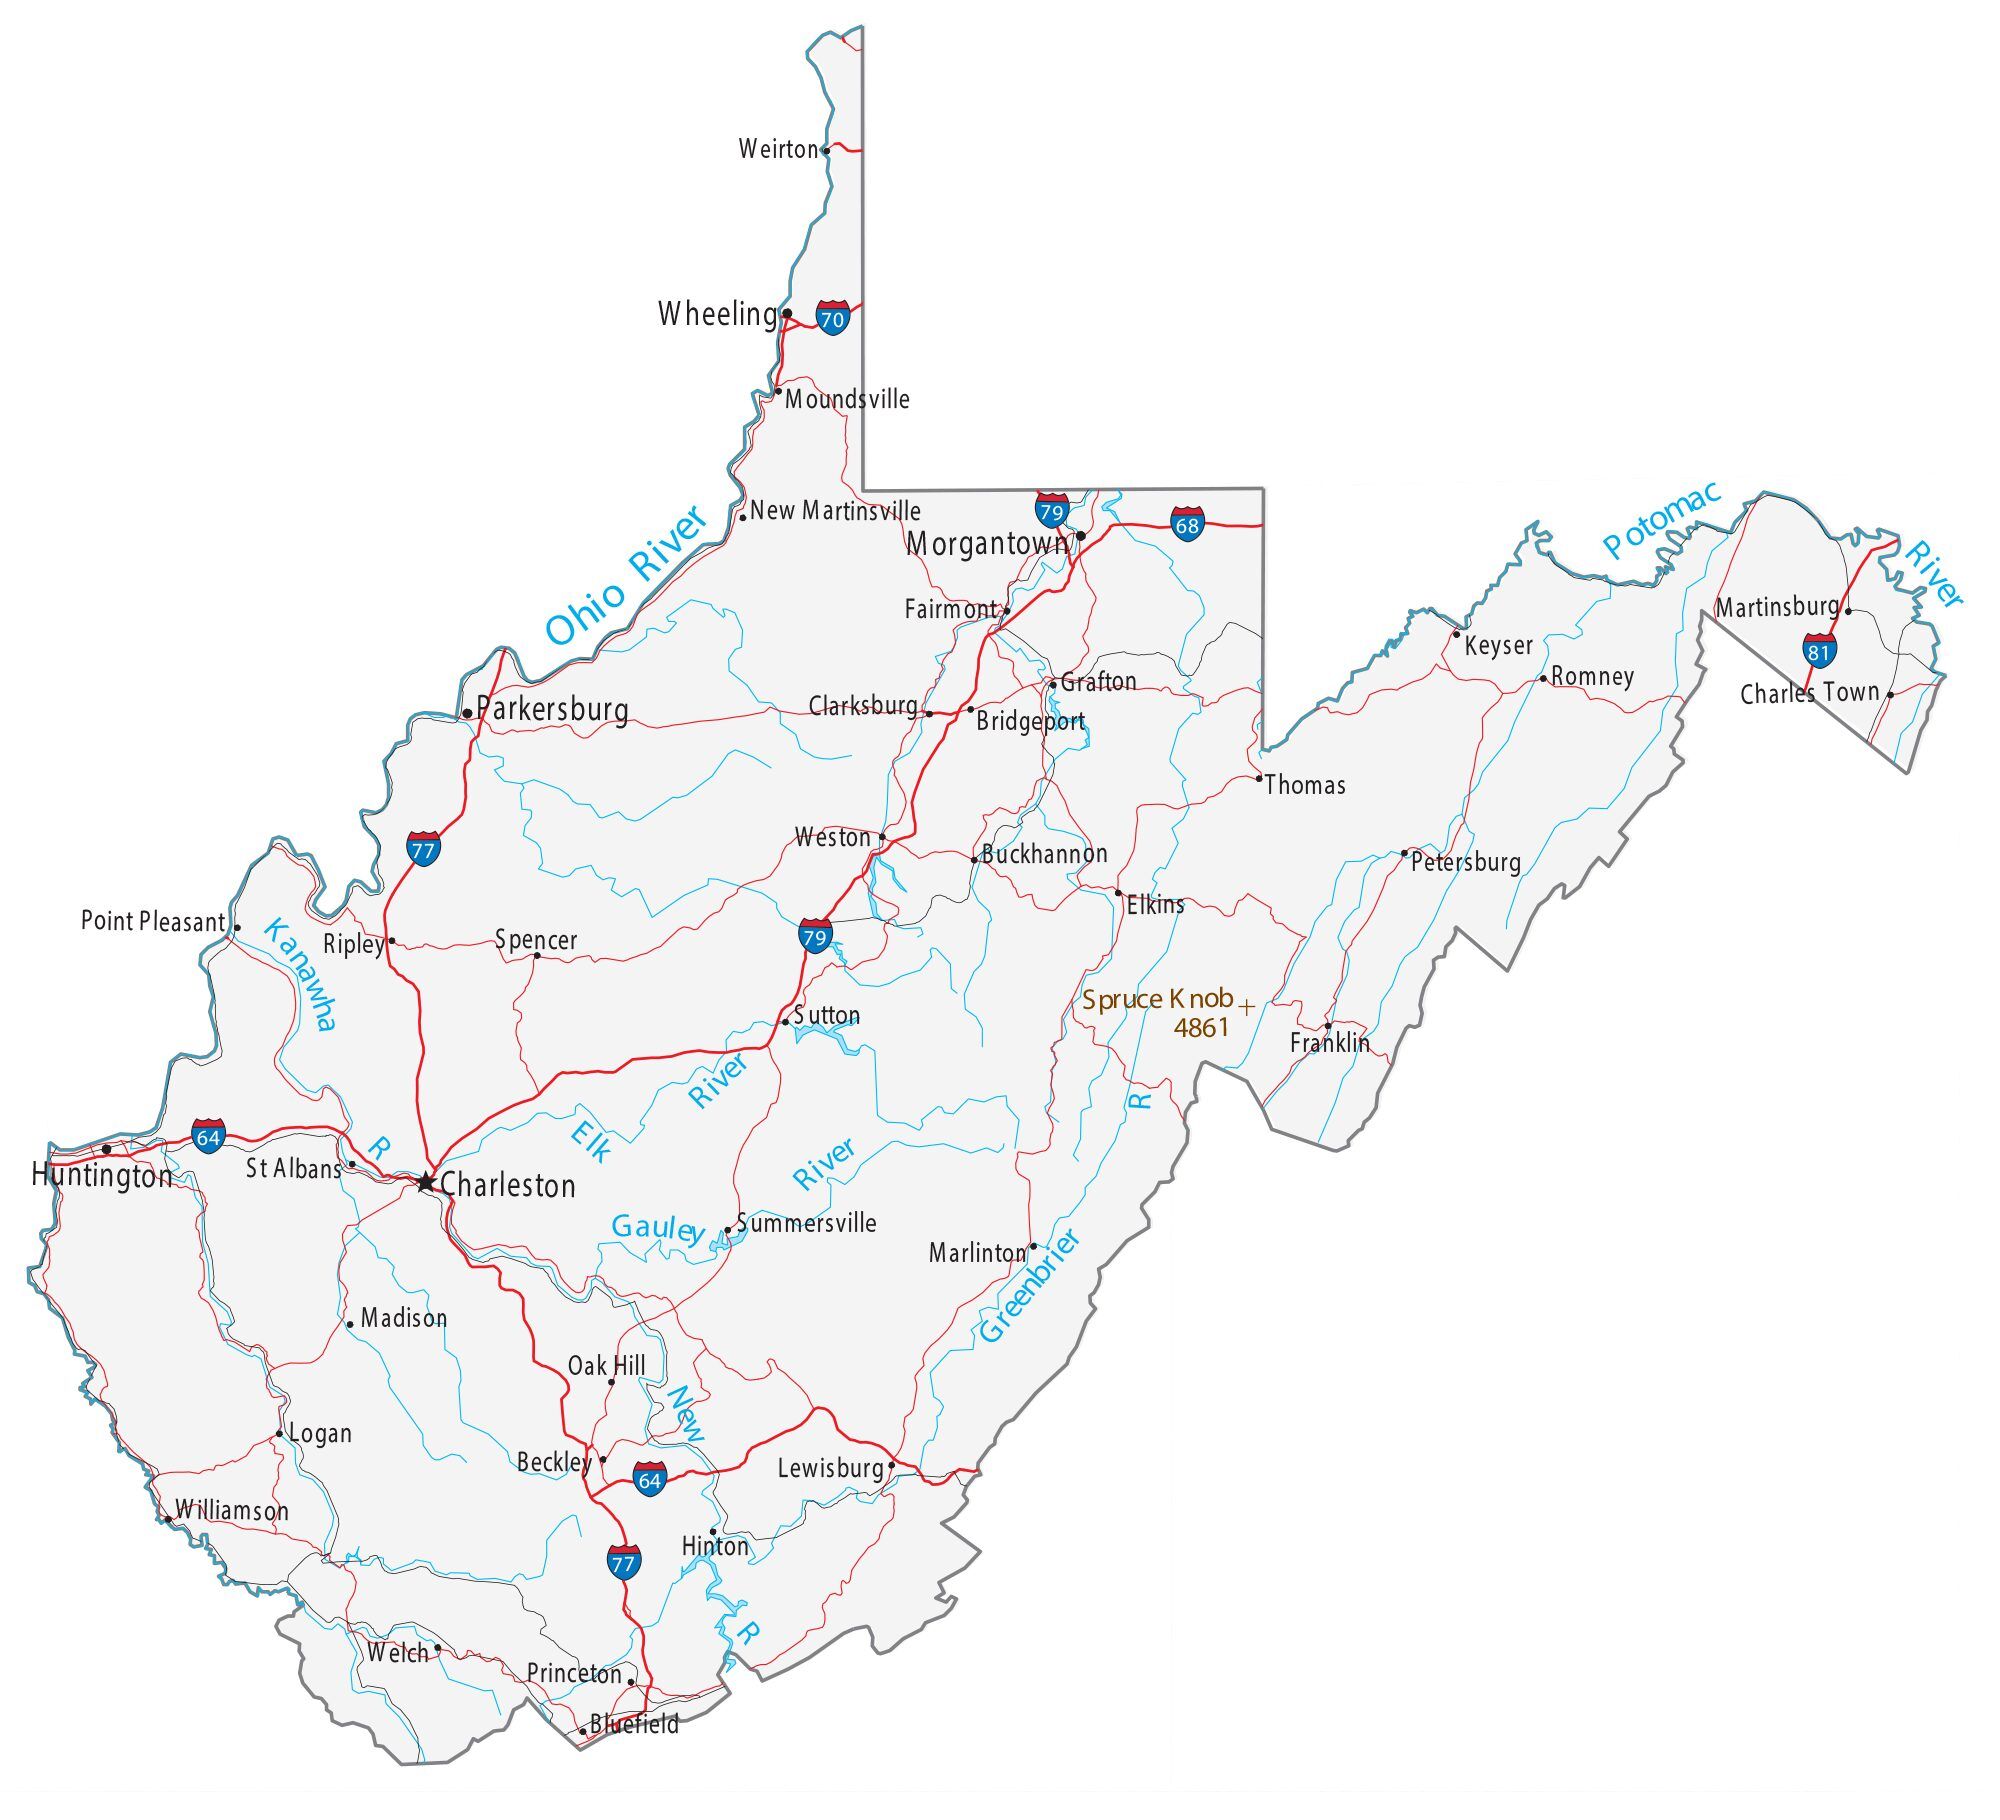 Map of West Virginia - Cities and Roads - GIS Geography